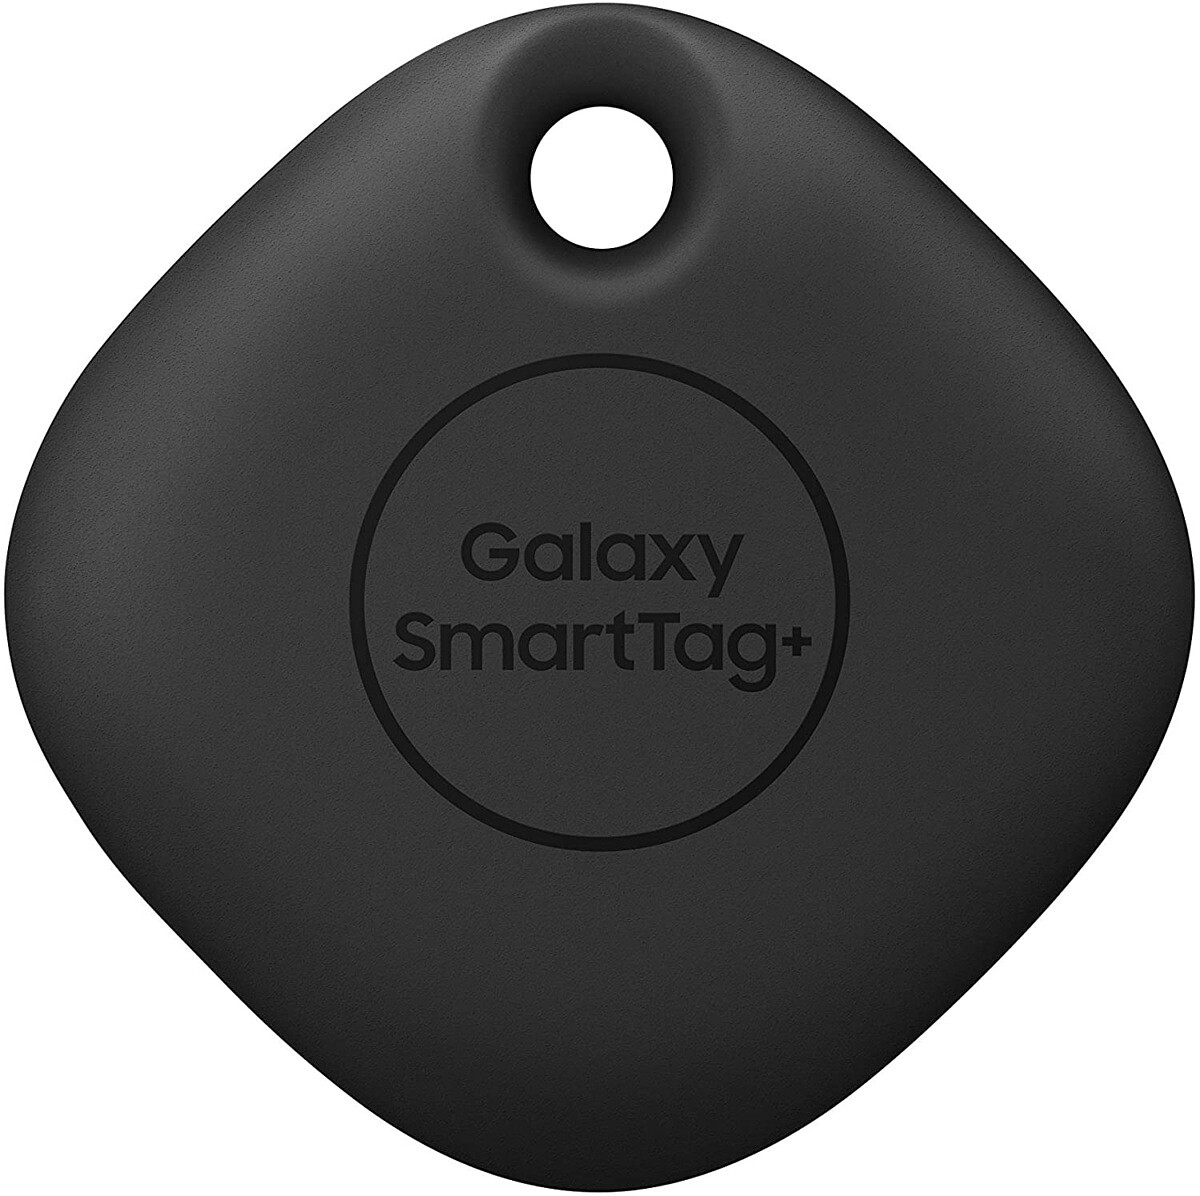 You can now buy the Galaxy SmartTag+, basically AirTags for Samsung Galaxy phones